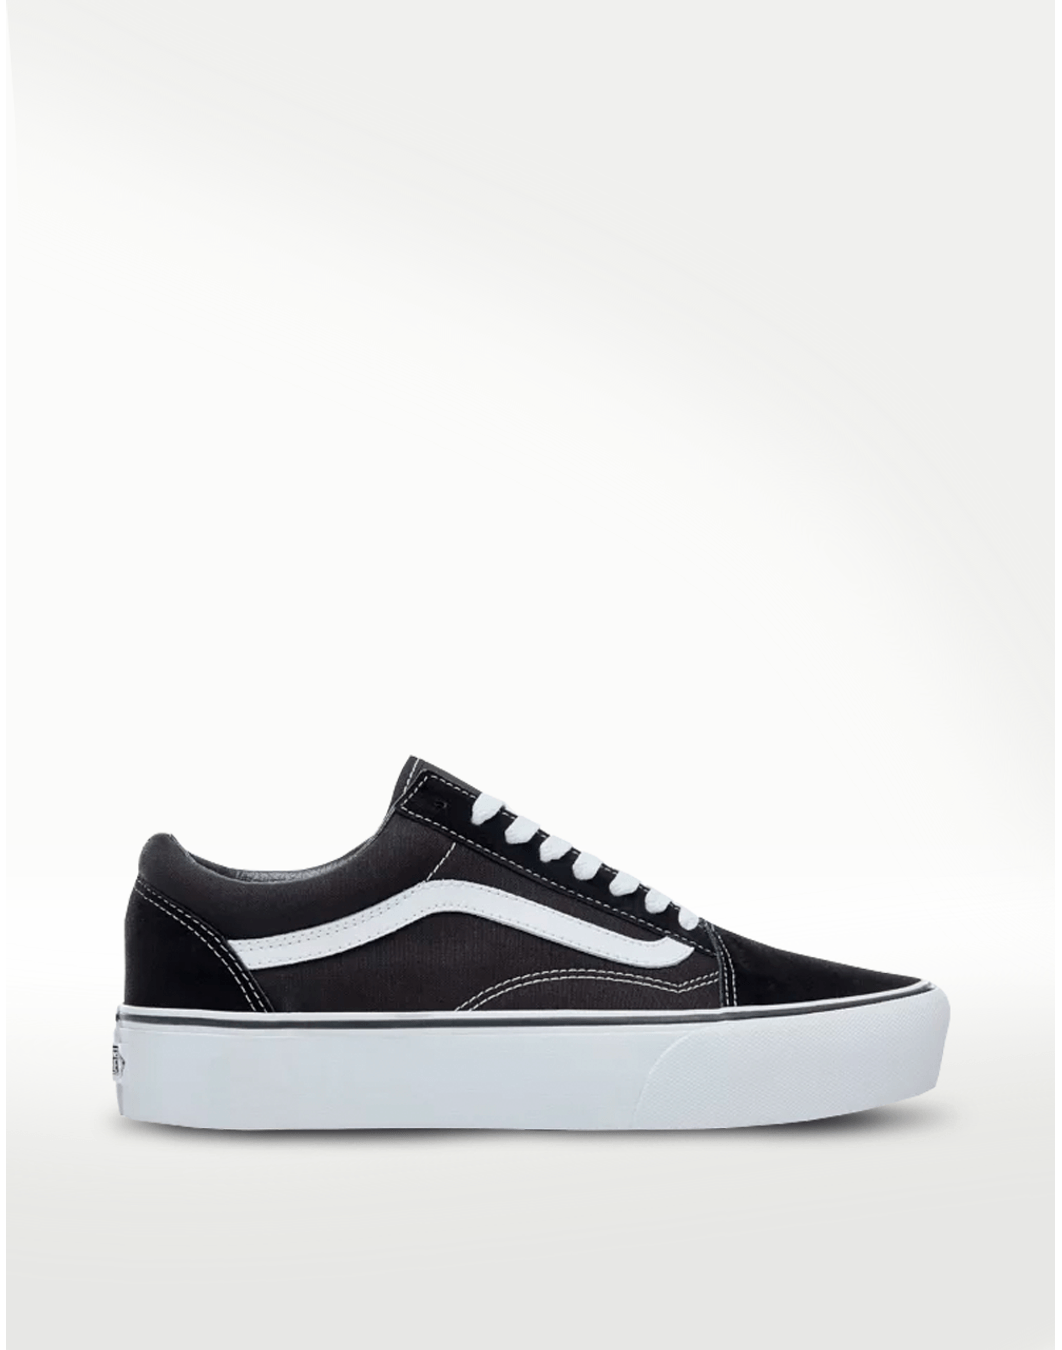 philosophy Joint selection fireplace Vans Old Skool Platform Mercadolibre Luxembourg, SAVE 35% -  www.experiencegrace.church